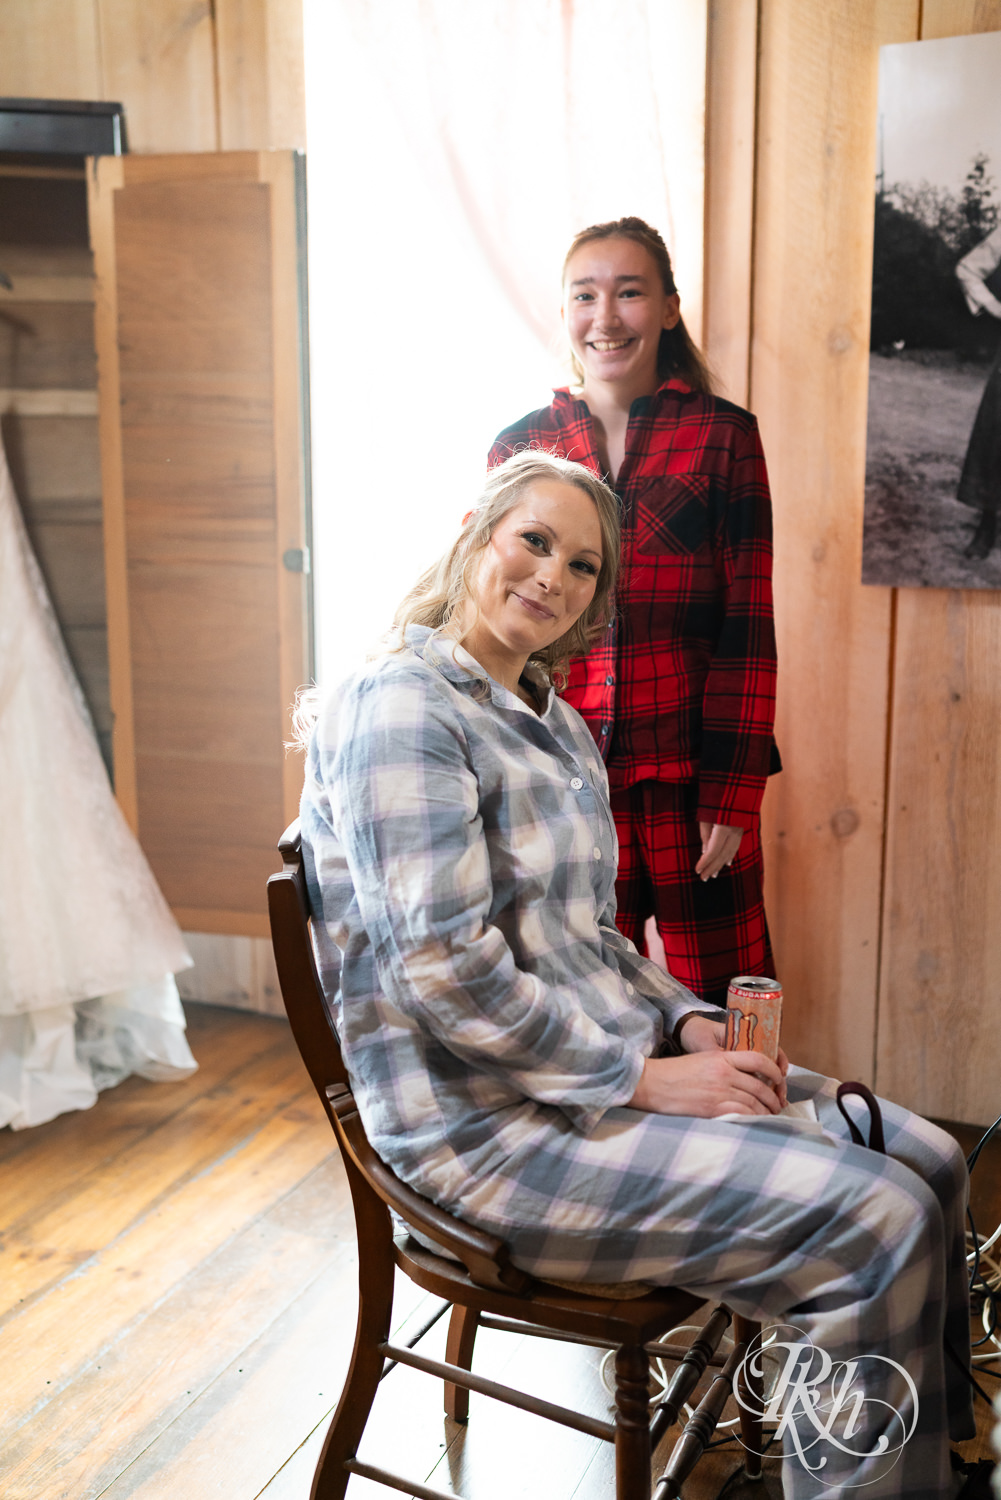 Bride gets hair and makeup done on wedding day at Almquist Farm in Hastings, Minnesota.